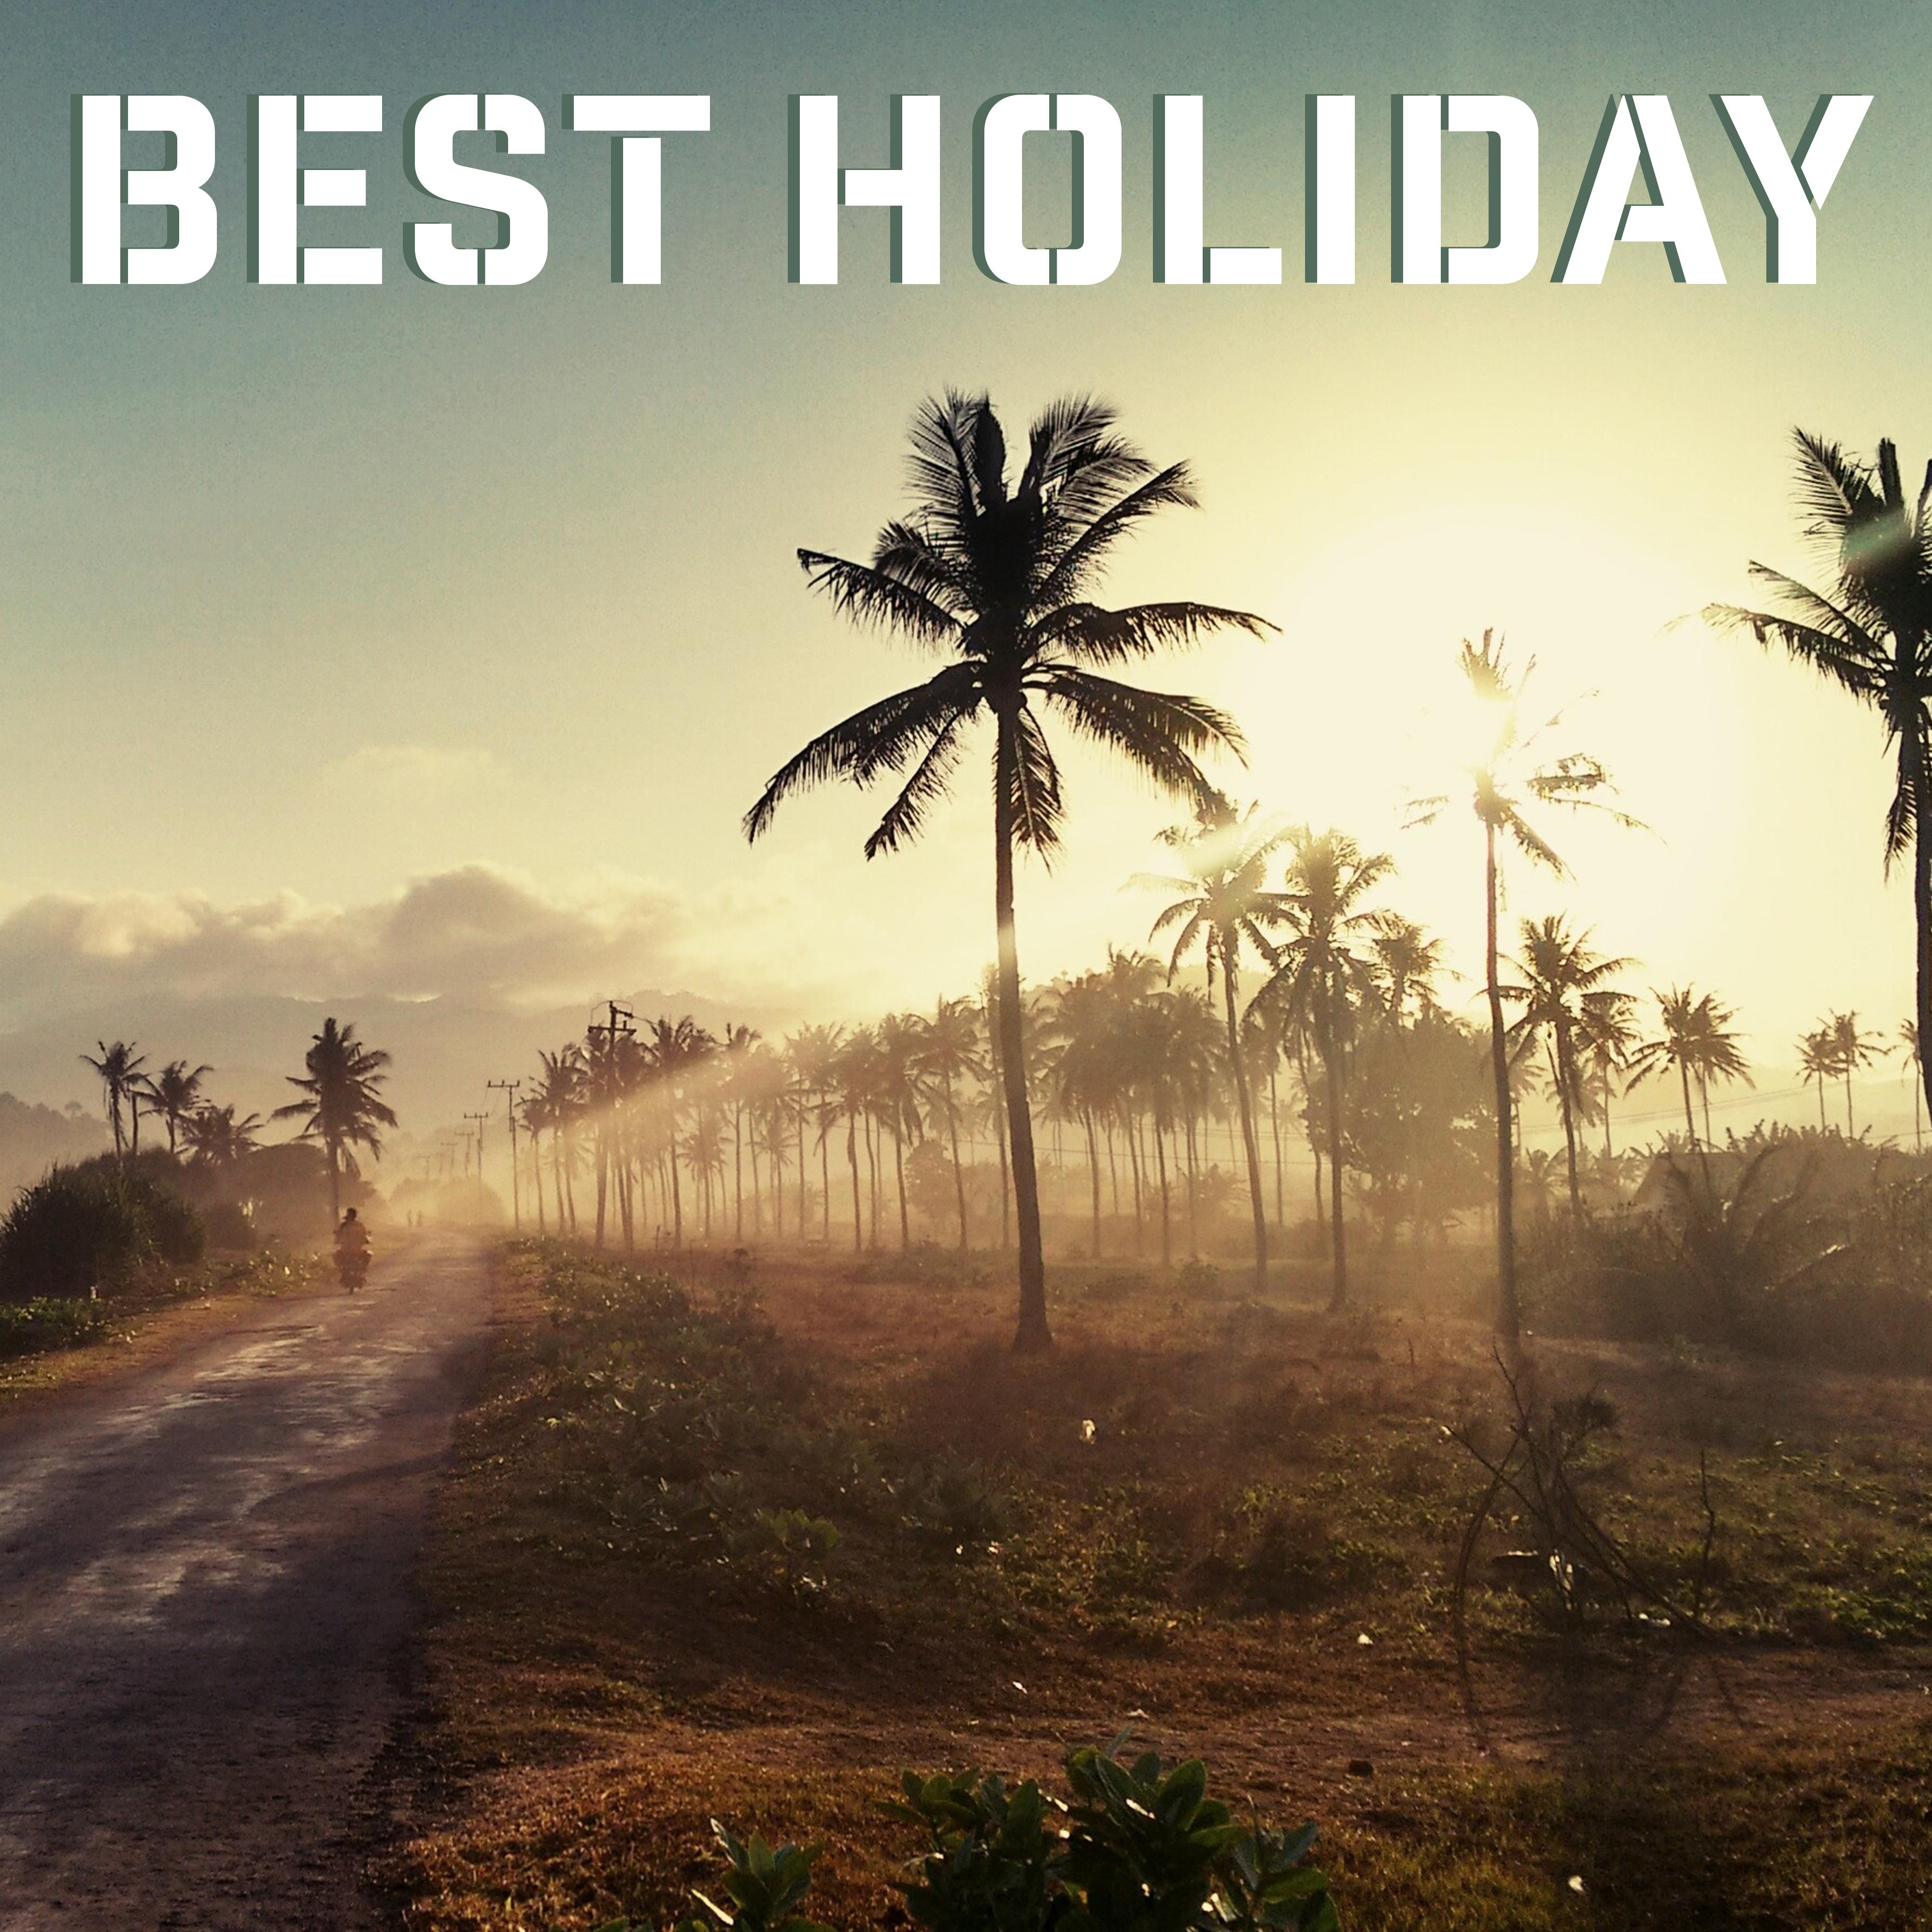 Best Holiday – Summer Chill, Relax on the Beach, Pure Rest, Chill Out Music, Deep Sun, Holiday Songs, Ibiza Lounge